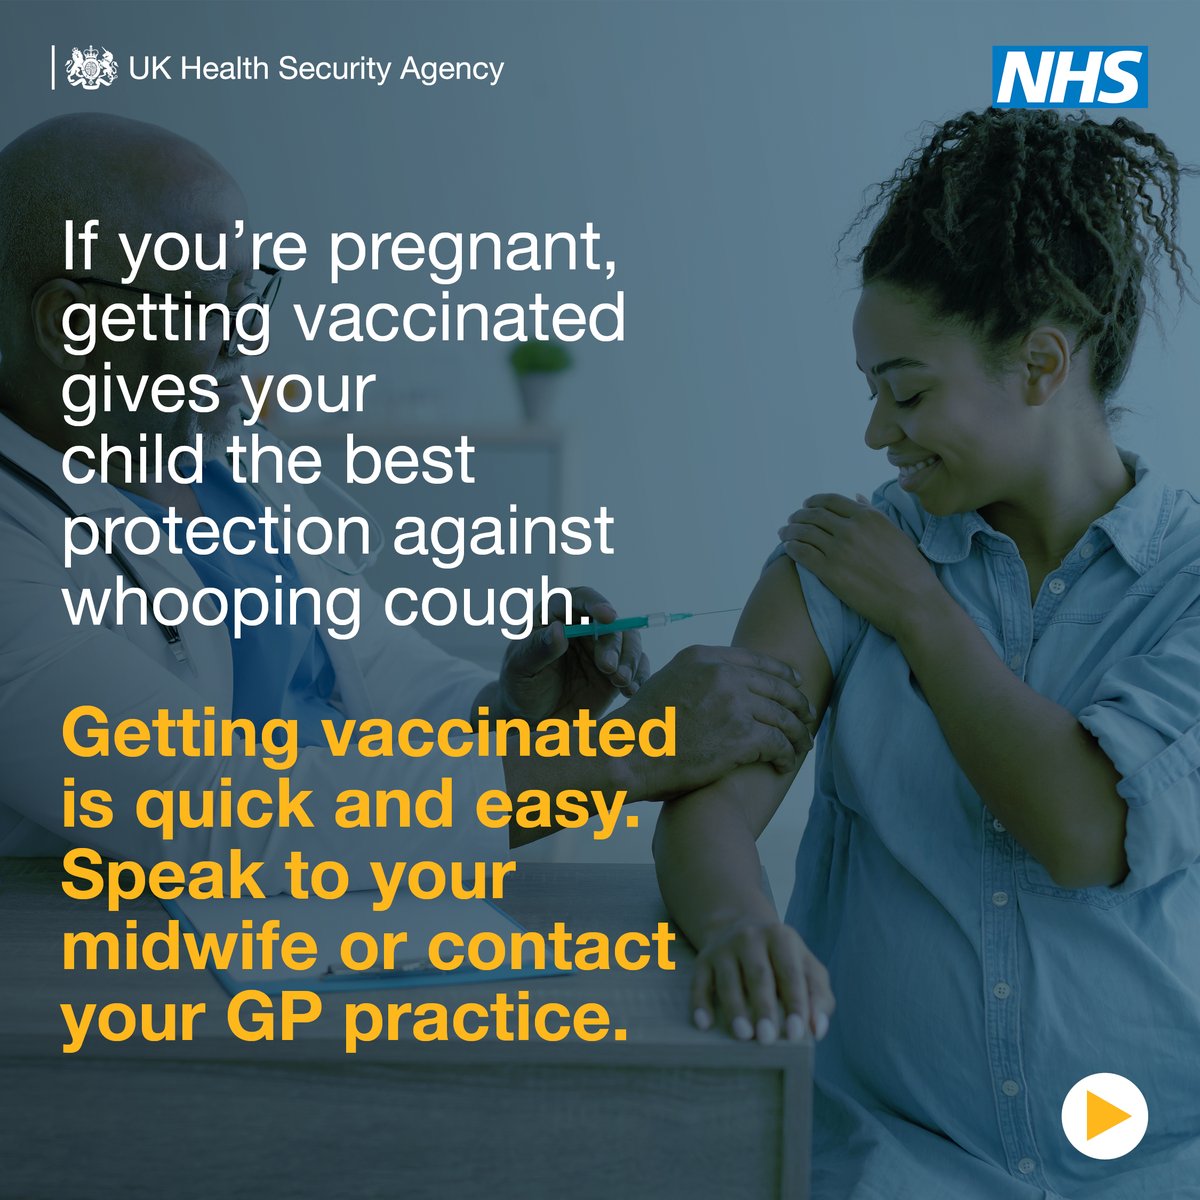 If you're pregnant, it's important to take up the #Pertussis vaccine when offered. It helps to protect your baby in their first few weeks of life, as #WhoopingCough can be life-threatening & require hospital treatment. More 👉 cwac.co/kaYfB